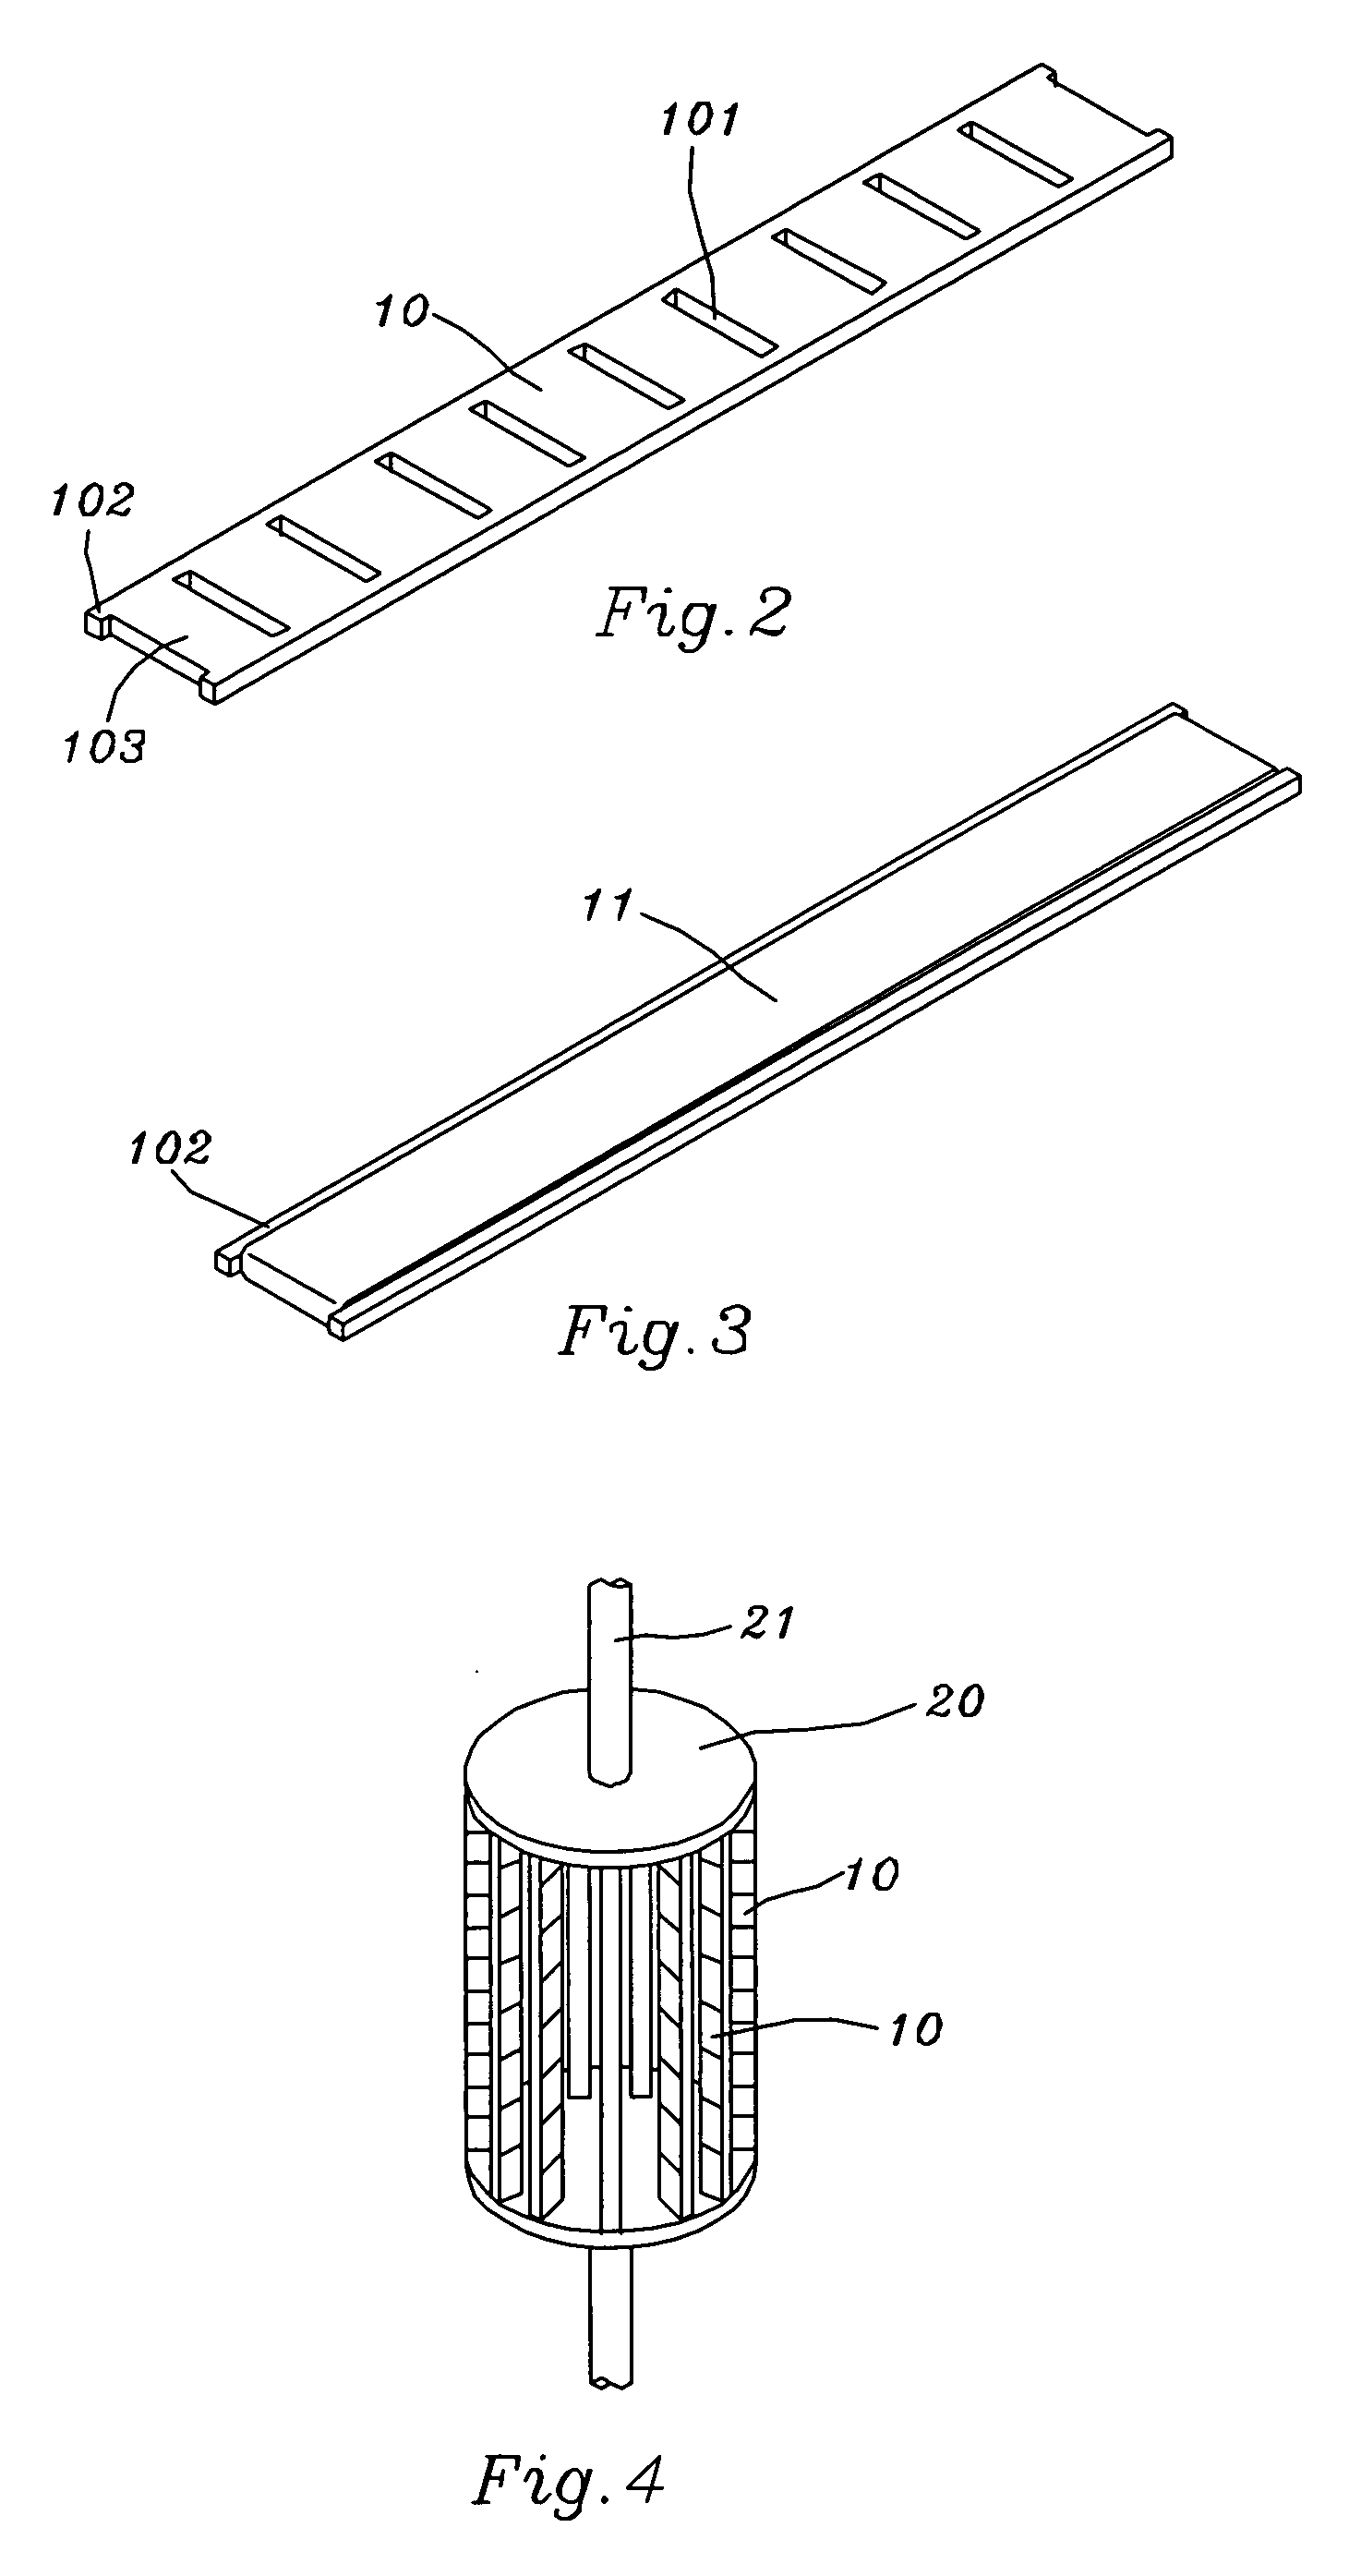 Electroplating method in the manufacture of the surface mount precision metal resistor